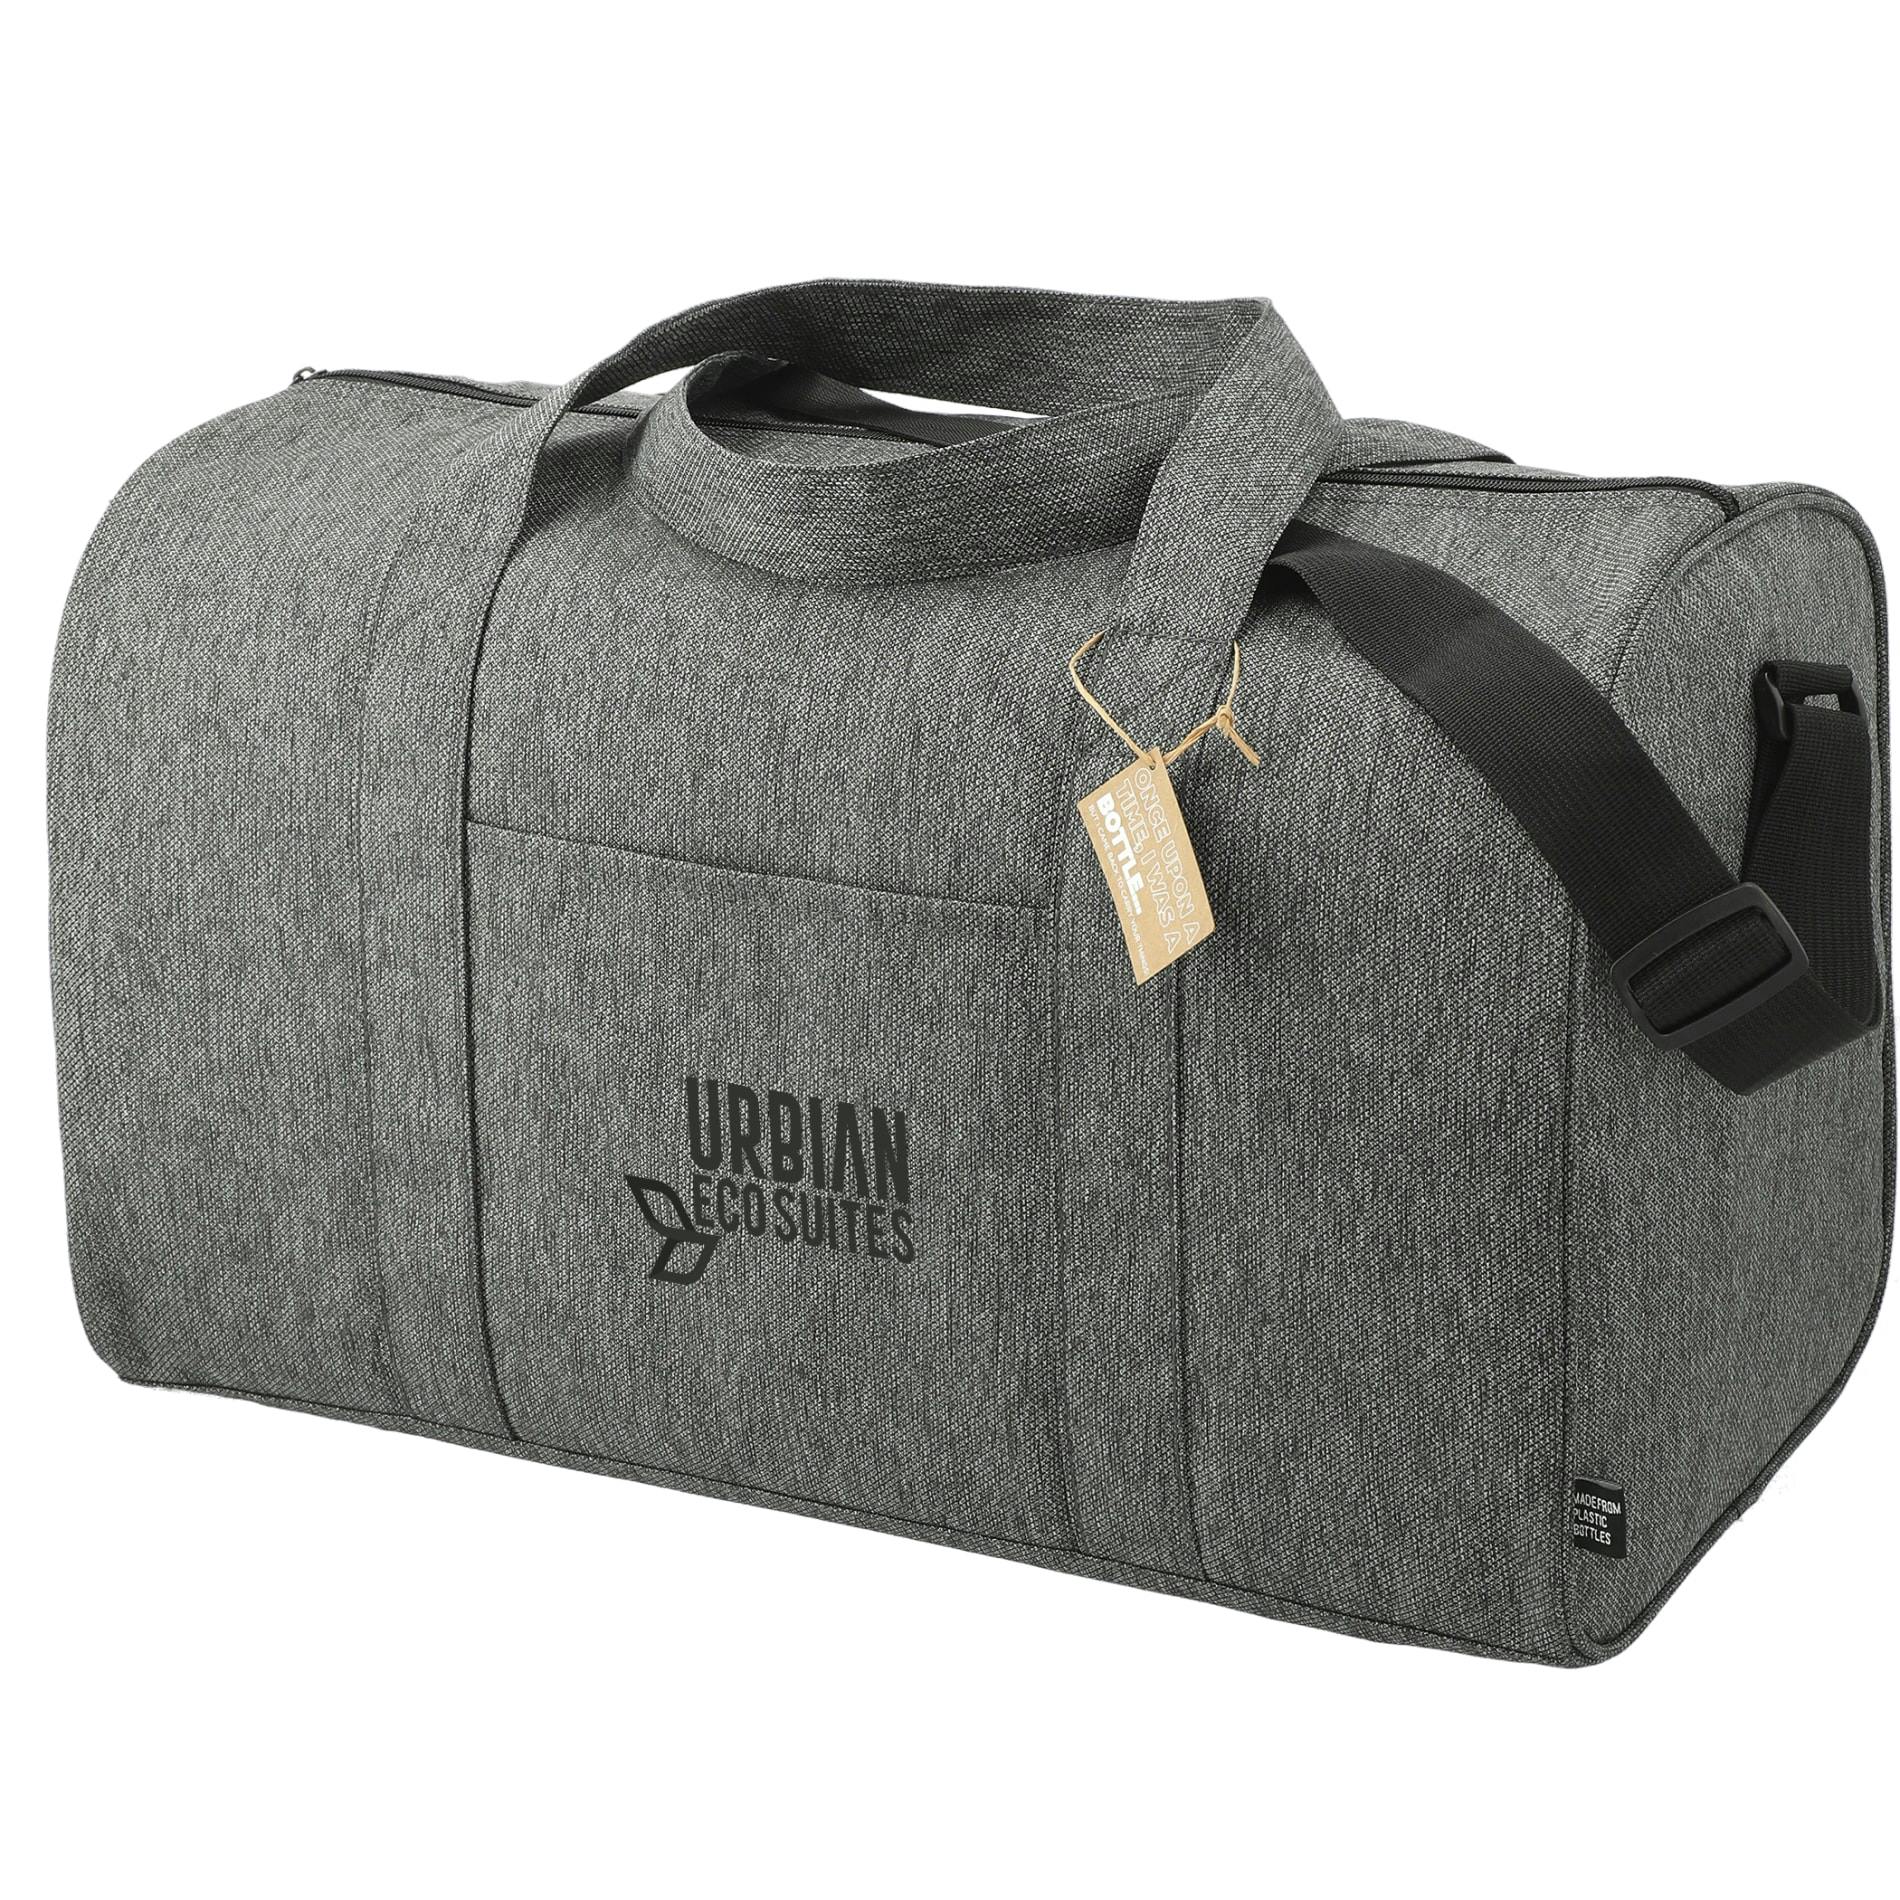 Vila Recycled Executive Duffel - additional Image 2